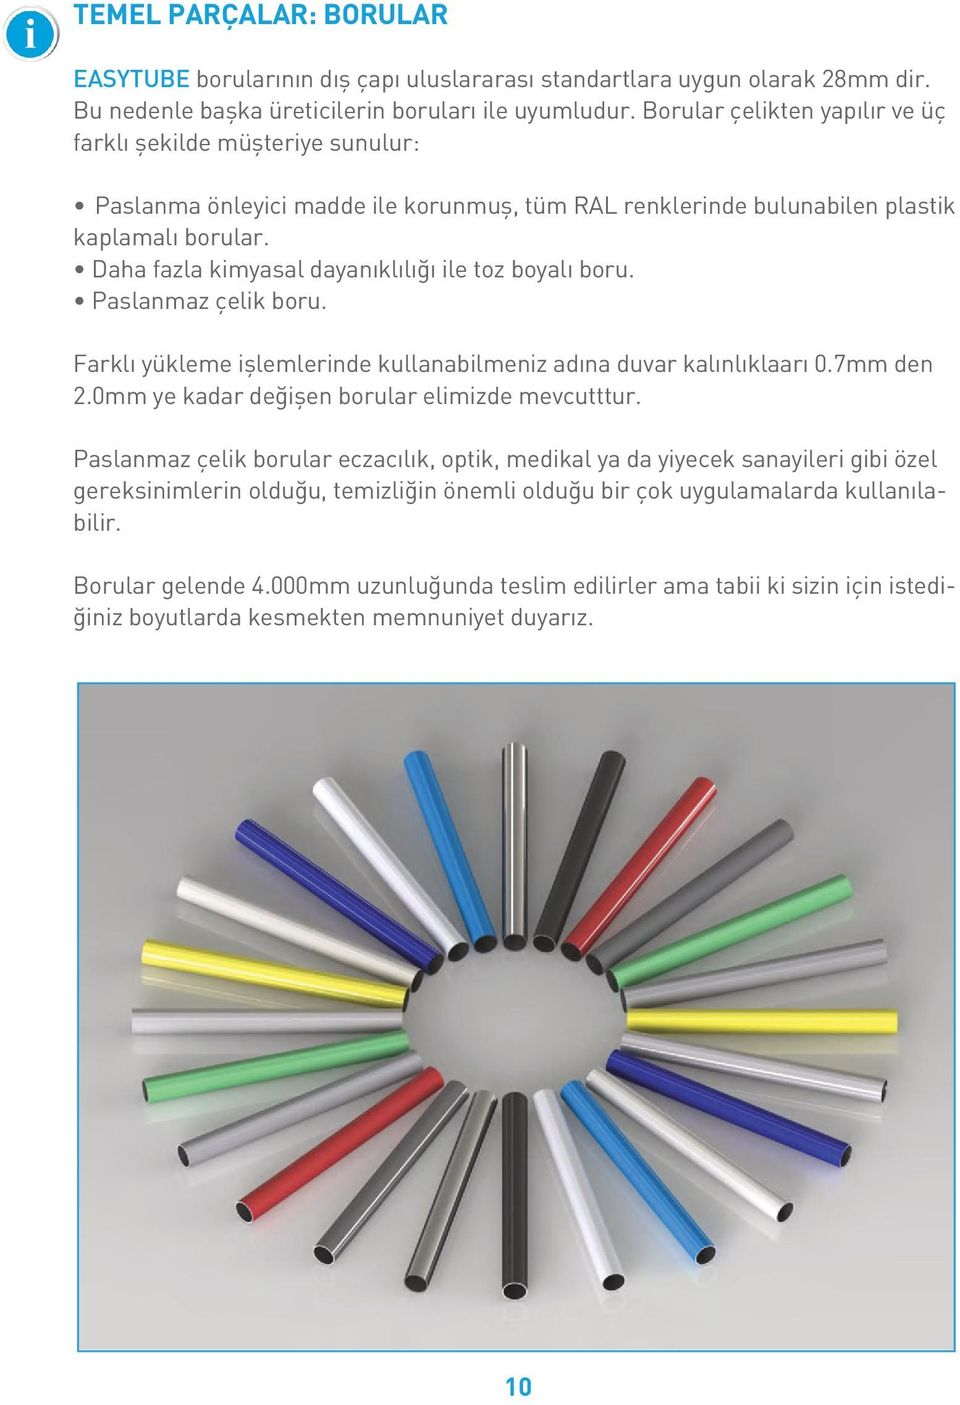 şekilde müşteriye The pipes sunulur: are made of steel, are available in three different types: ŸPaslanma Plastic coated önleyici pipes, madde available ile korunmuş, in all RAL colours, tüm RAL